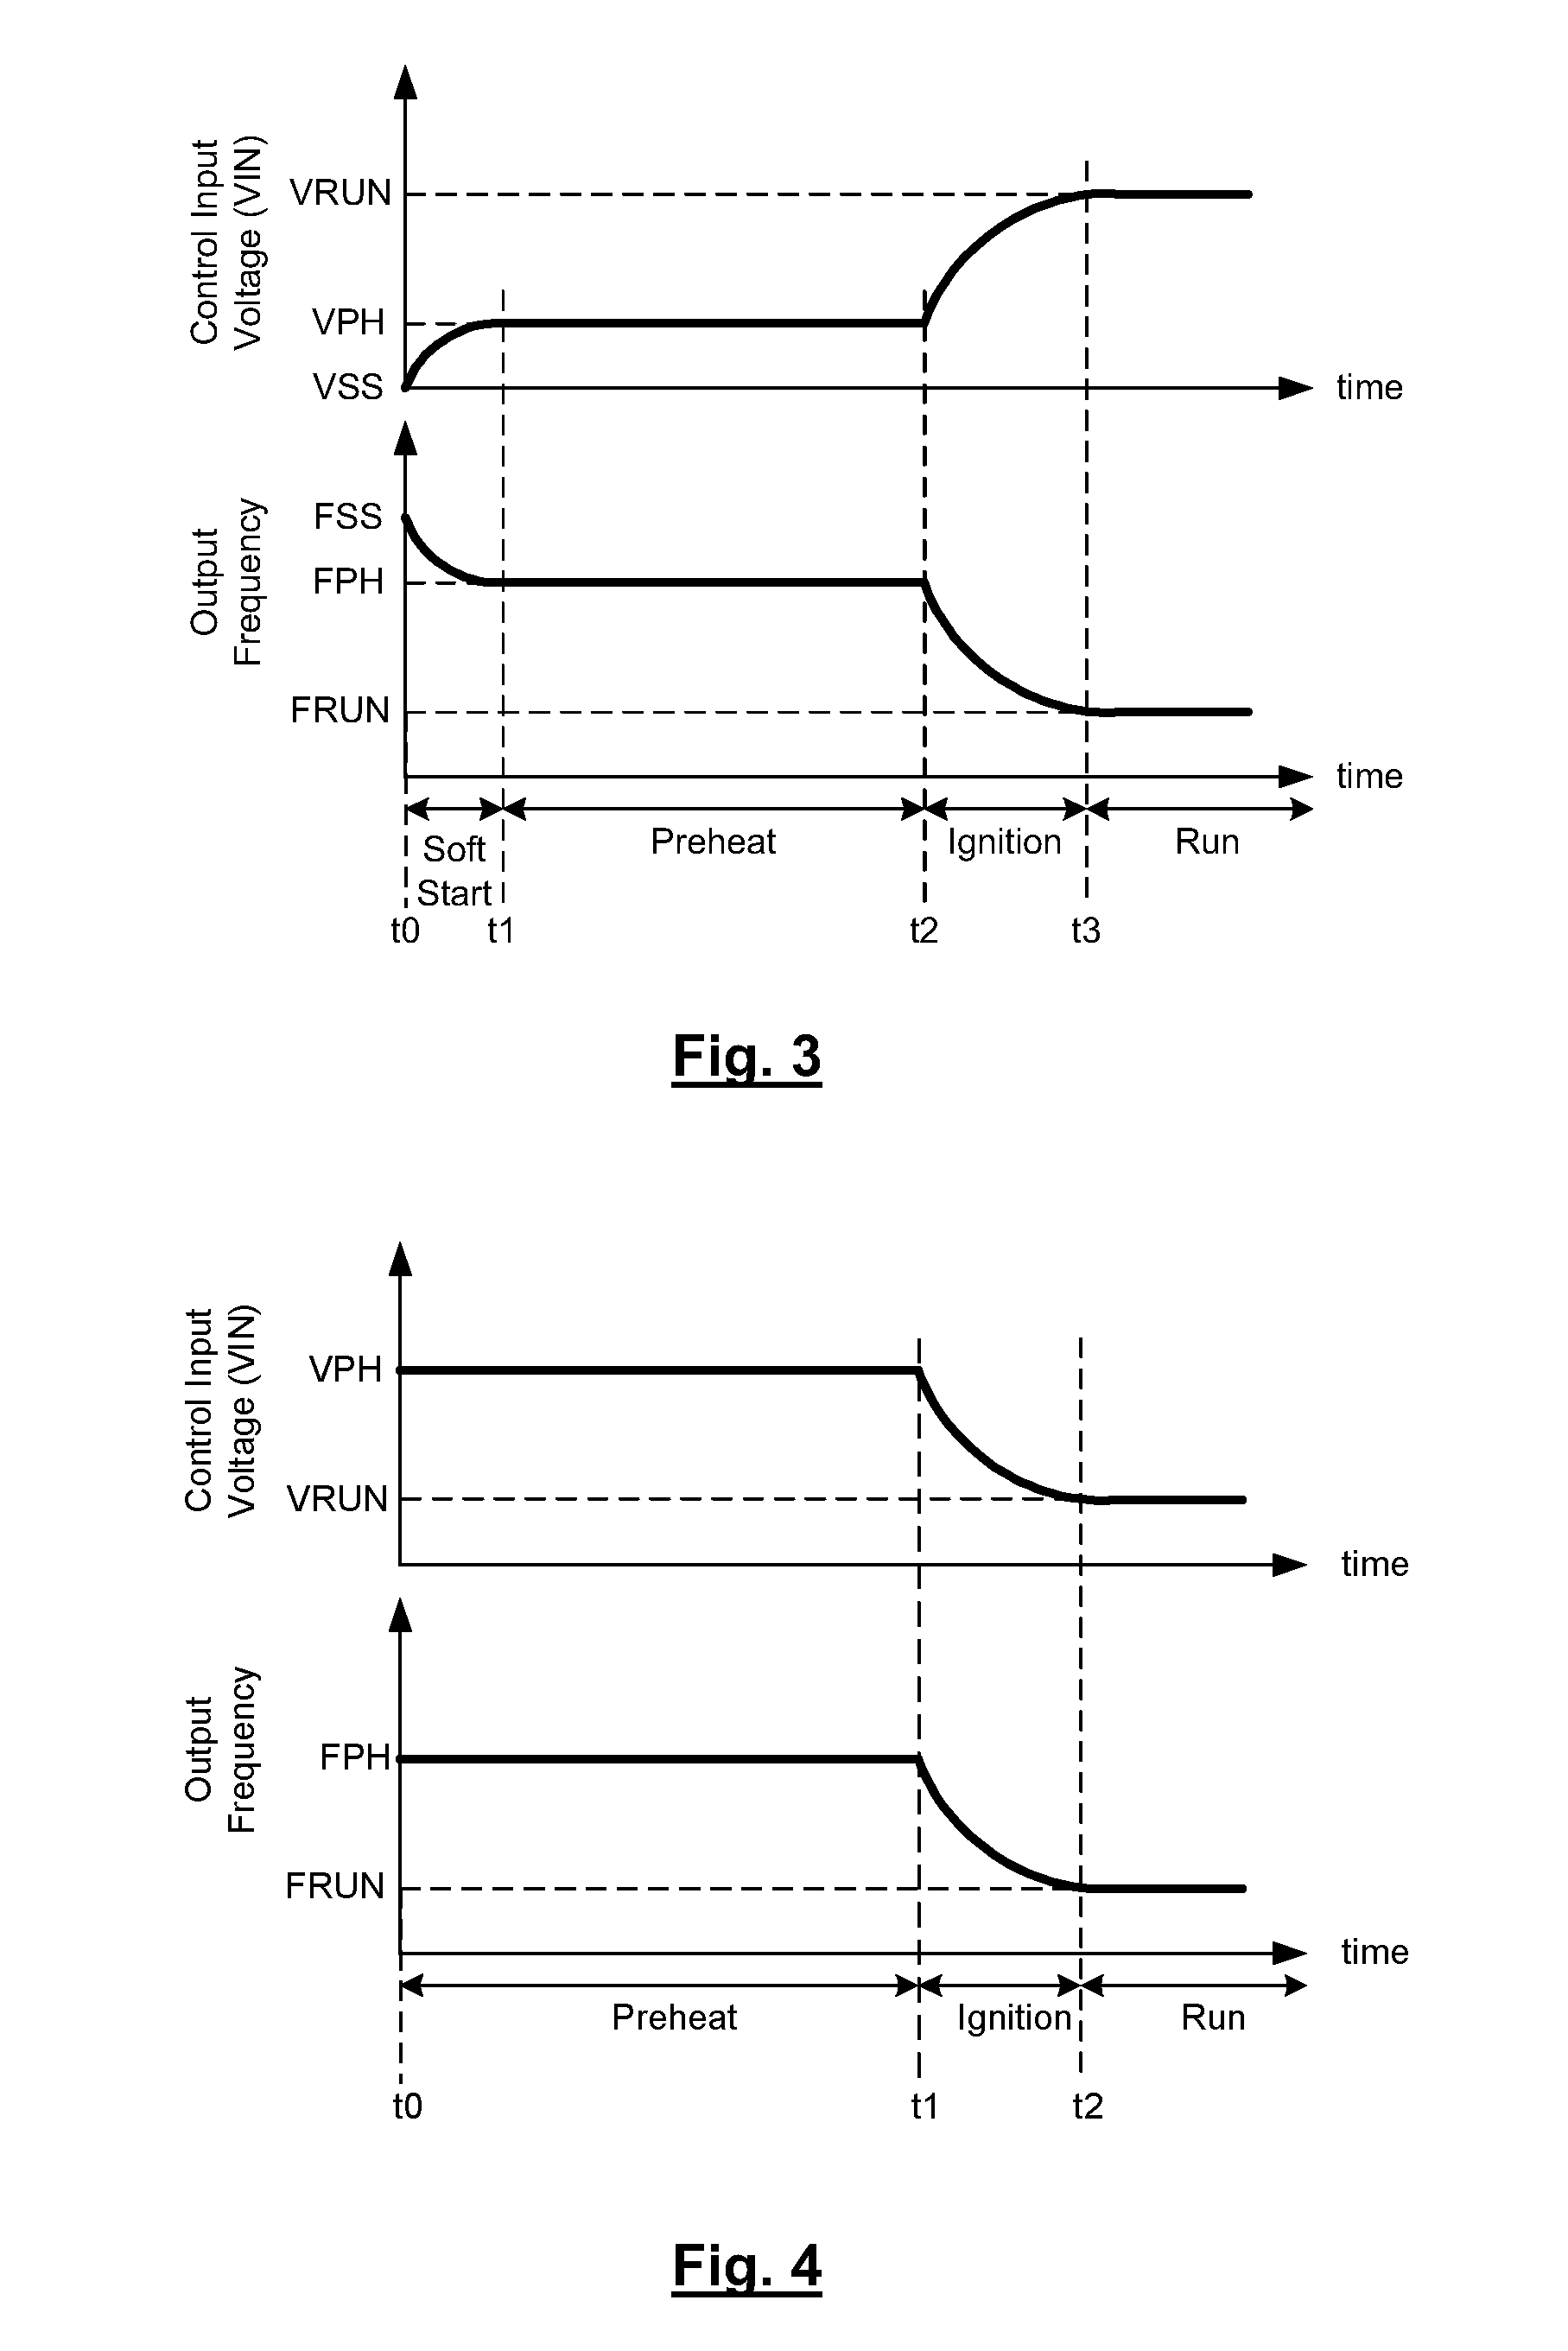 Single-input control circuit for programming electronic ballast parameters